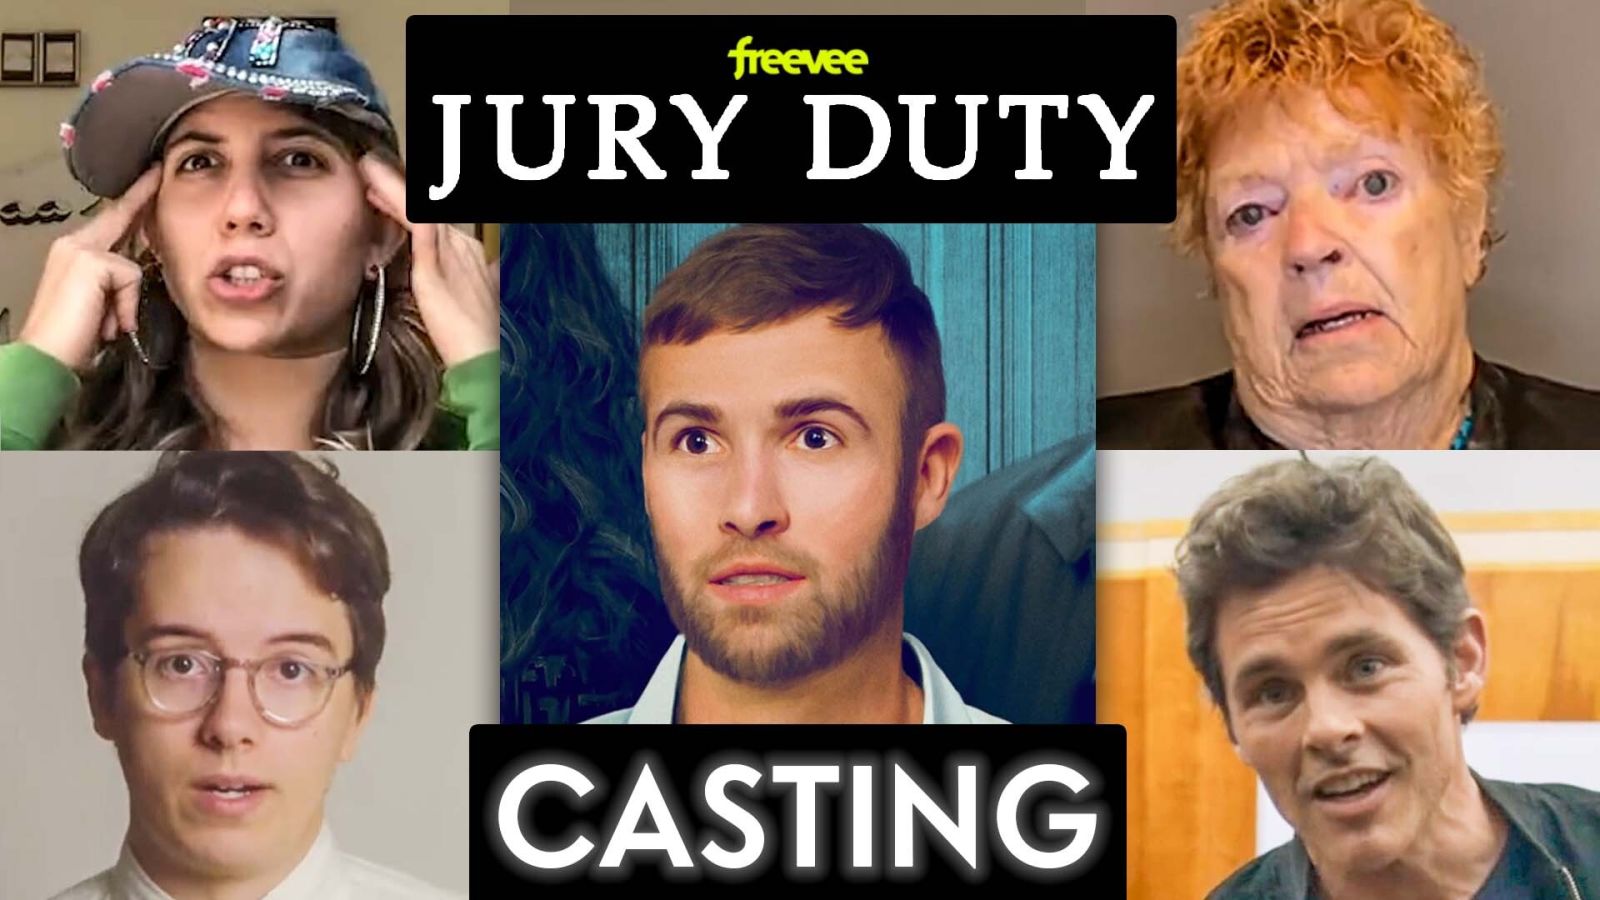 'Jury Duty' Auditions and How the Cast Landed Their Roles